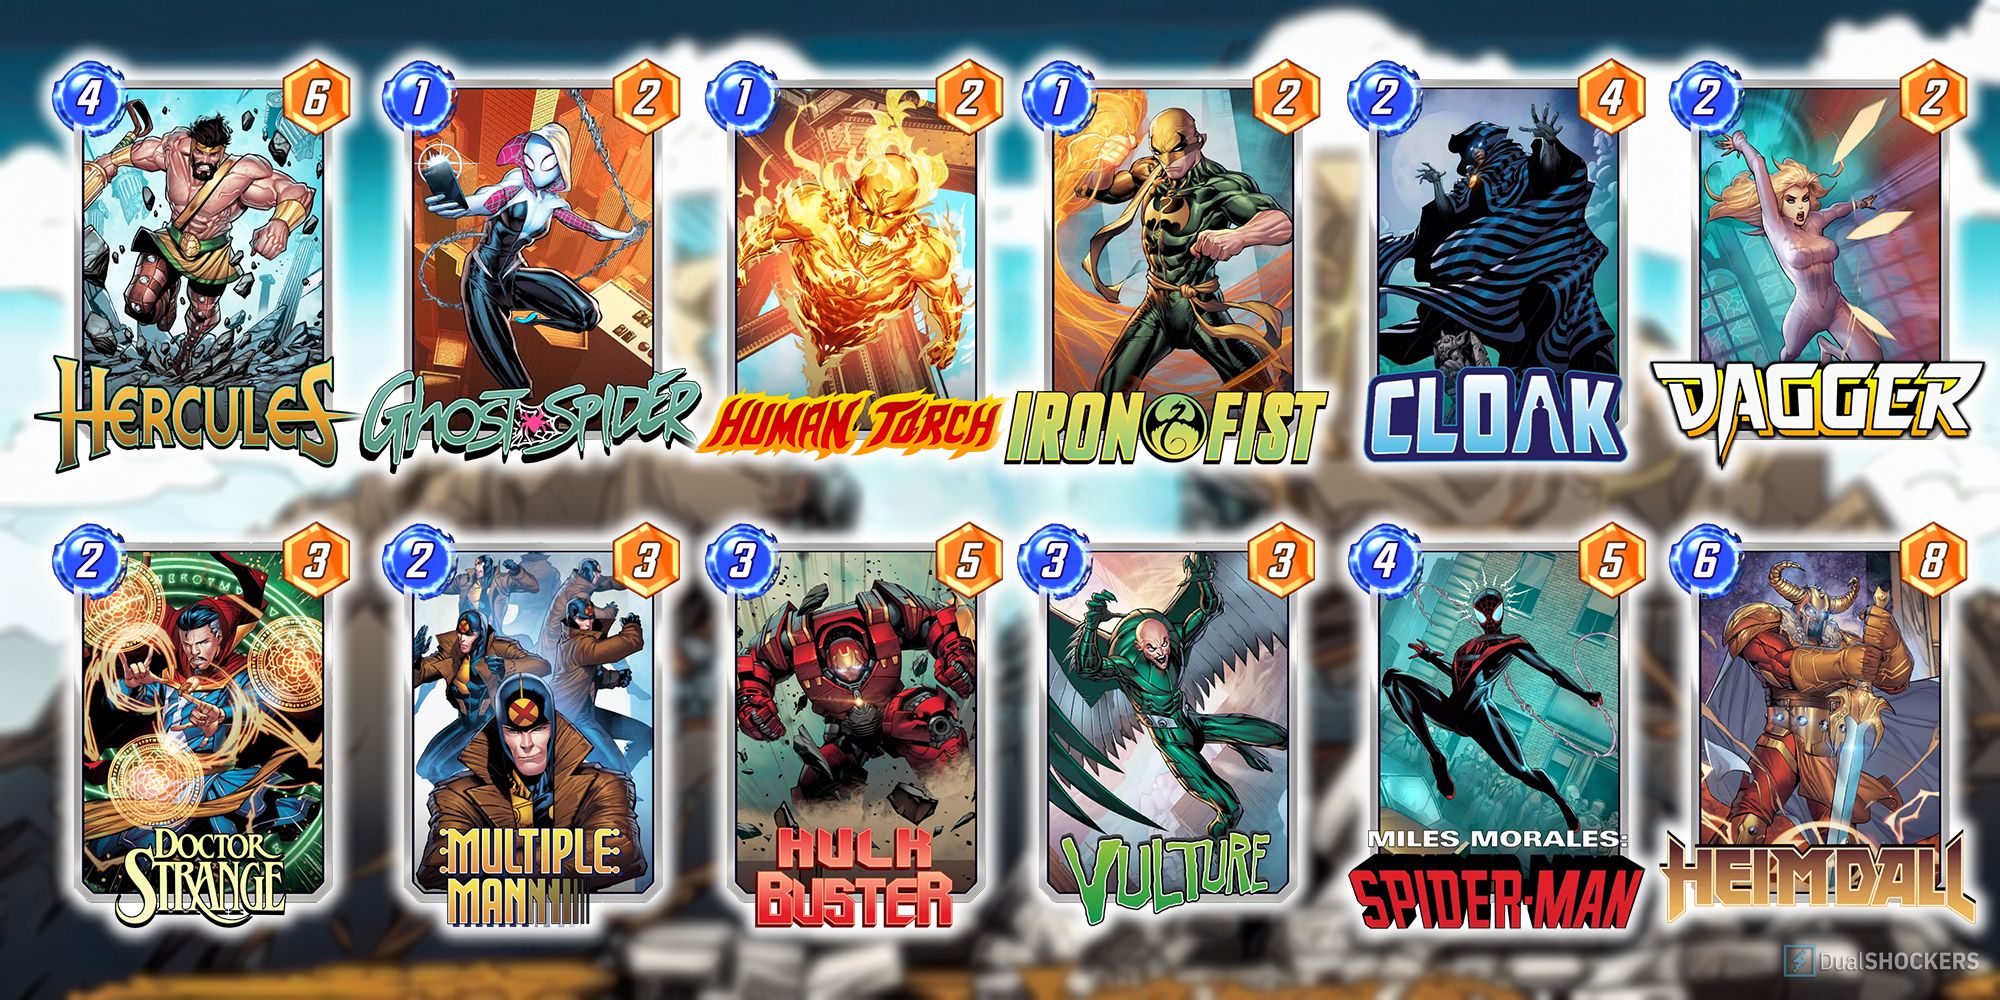 Marvel Snap deck comprised of Hercules, Ghost Spider, Human Torch, Iron Fist, Cloak, Dagger, Doctor Strange, Multiple Man, Hulk Buster, Vulture, Miles Morales' Spider-Man, and Heimdall.